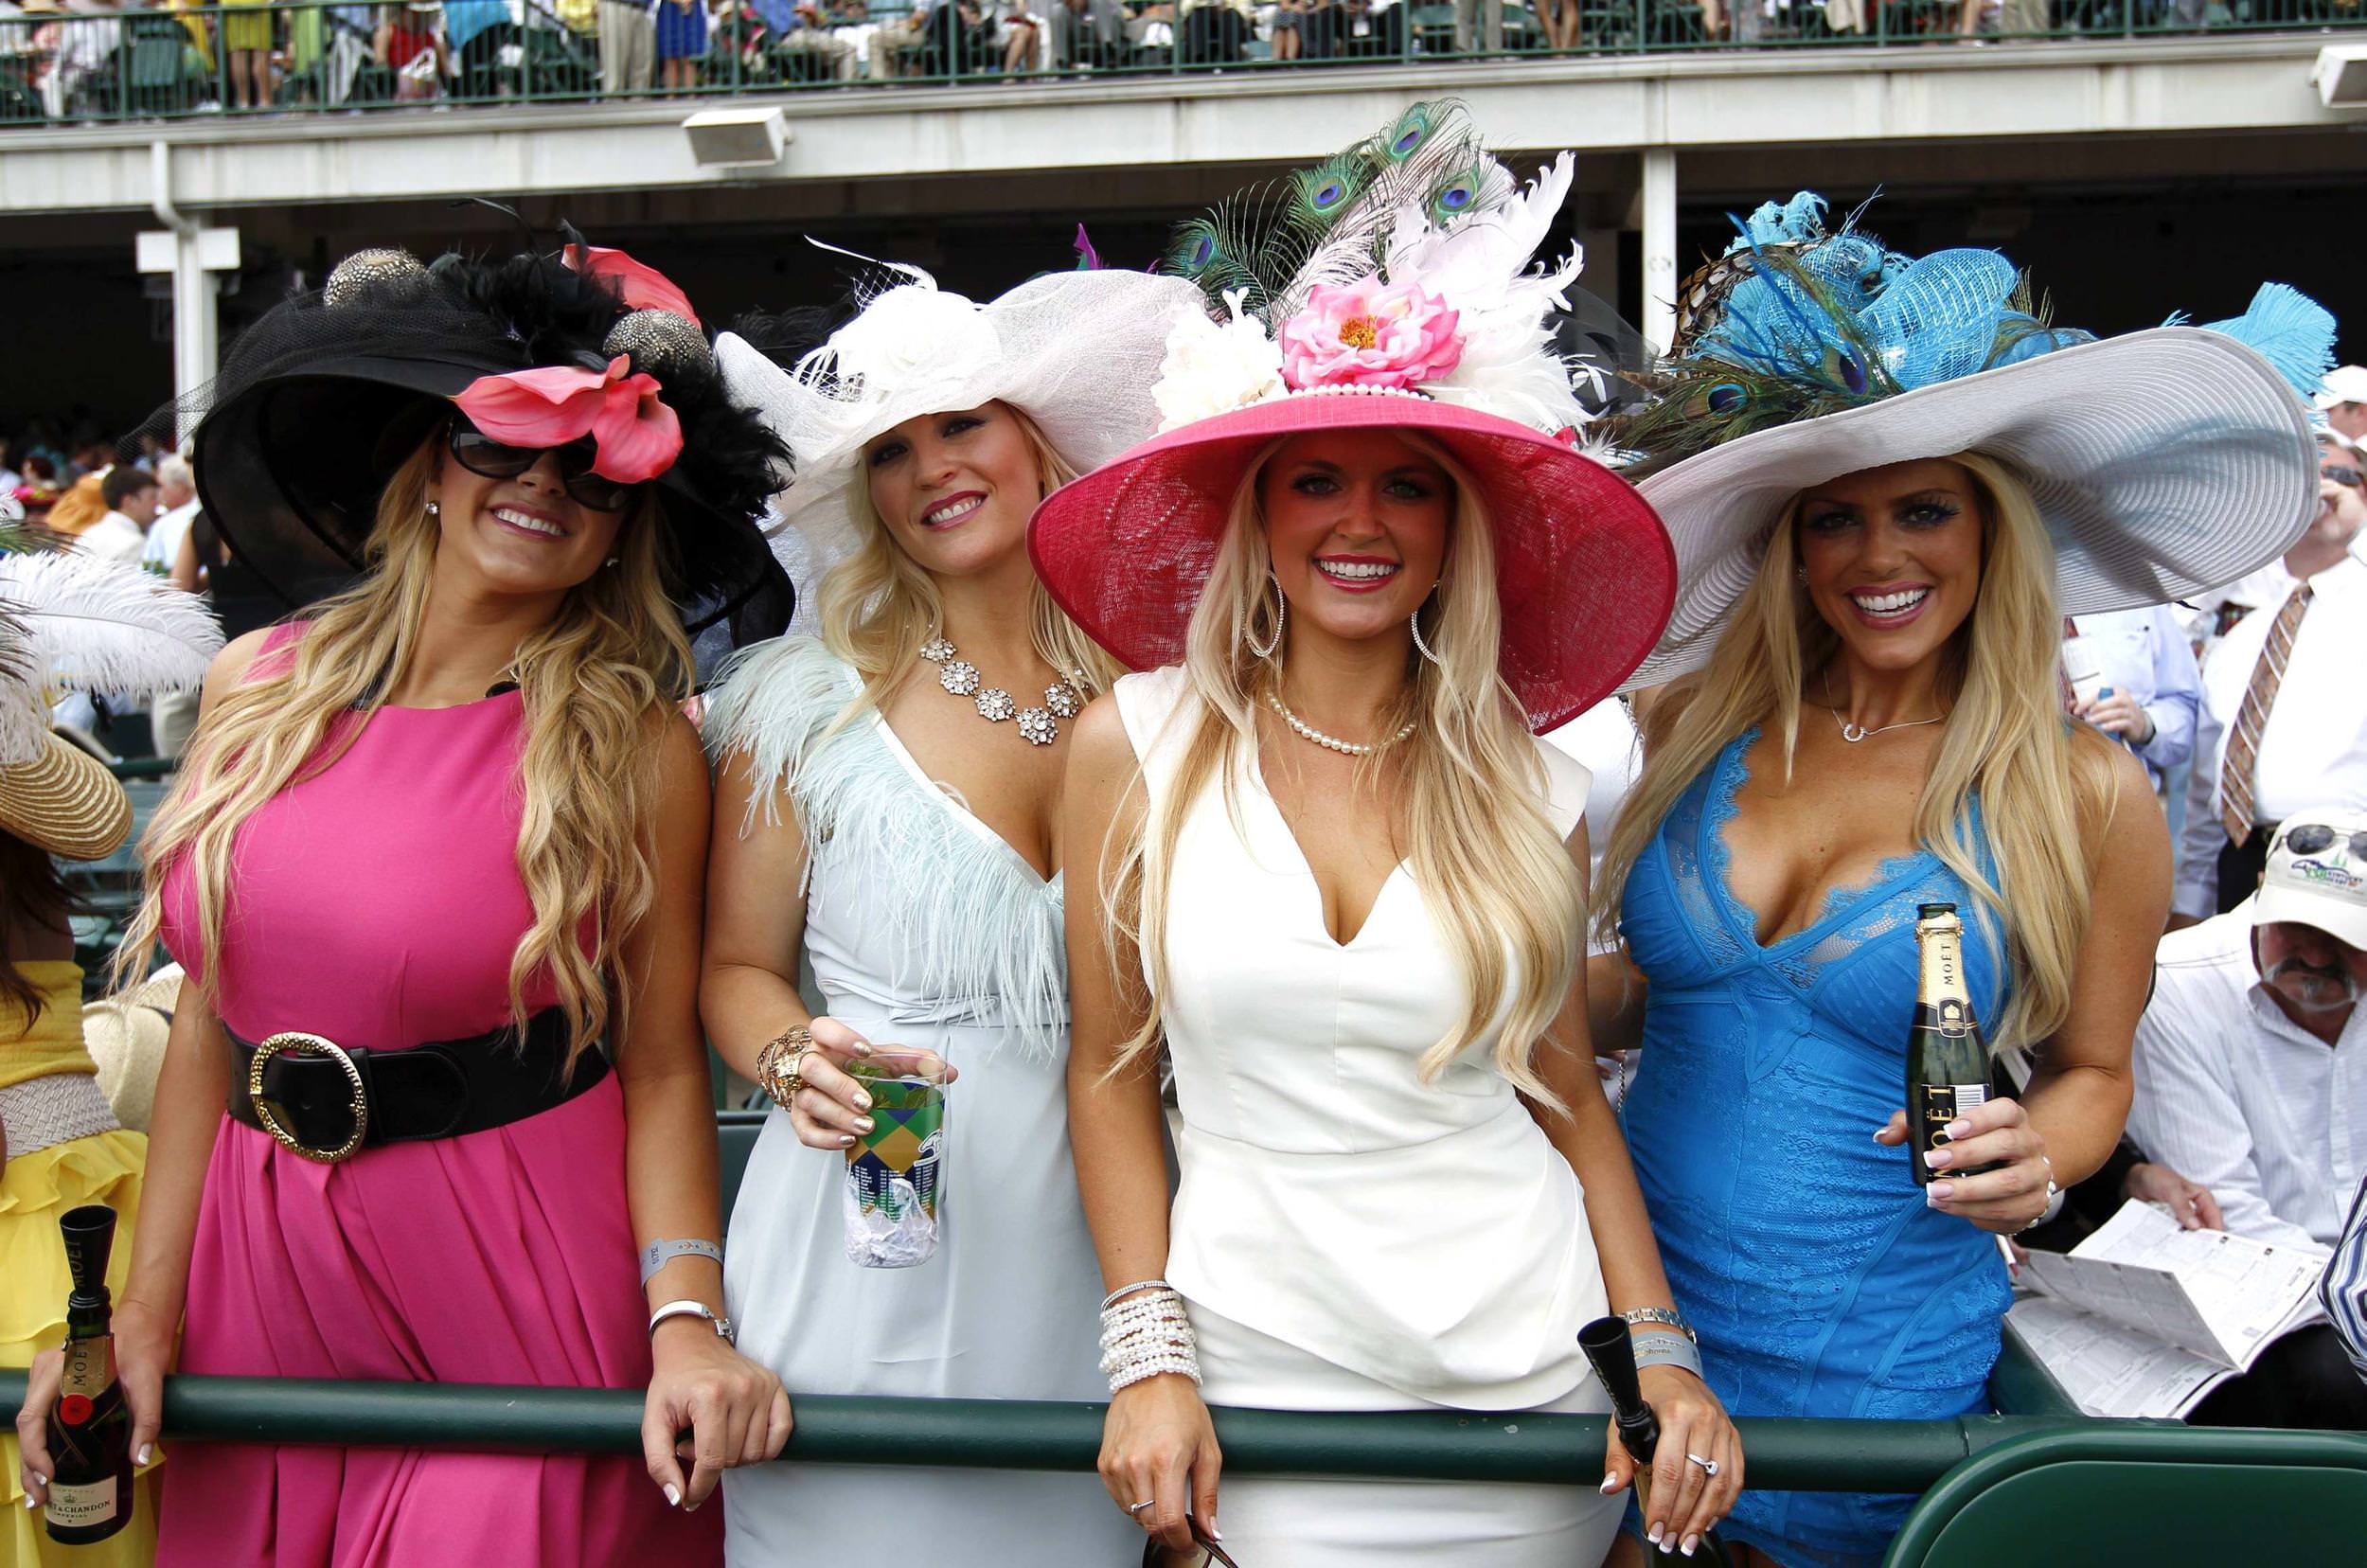 Kentucky Derby Party